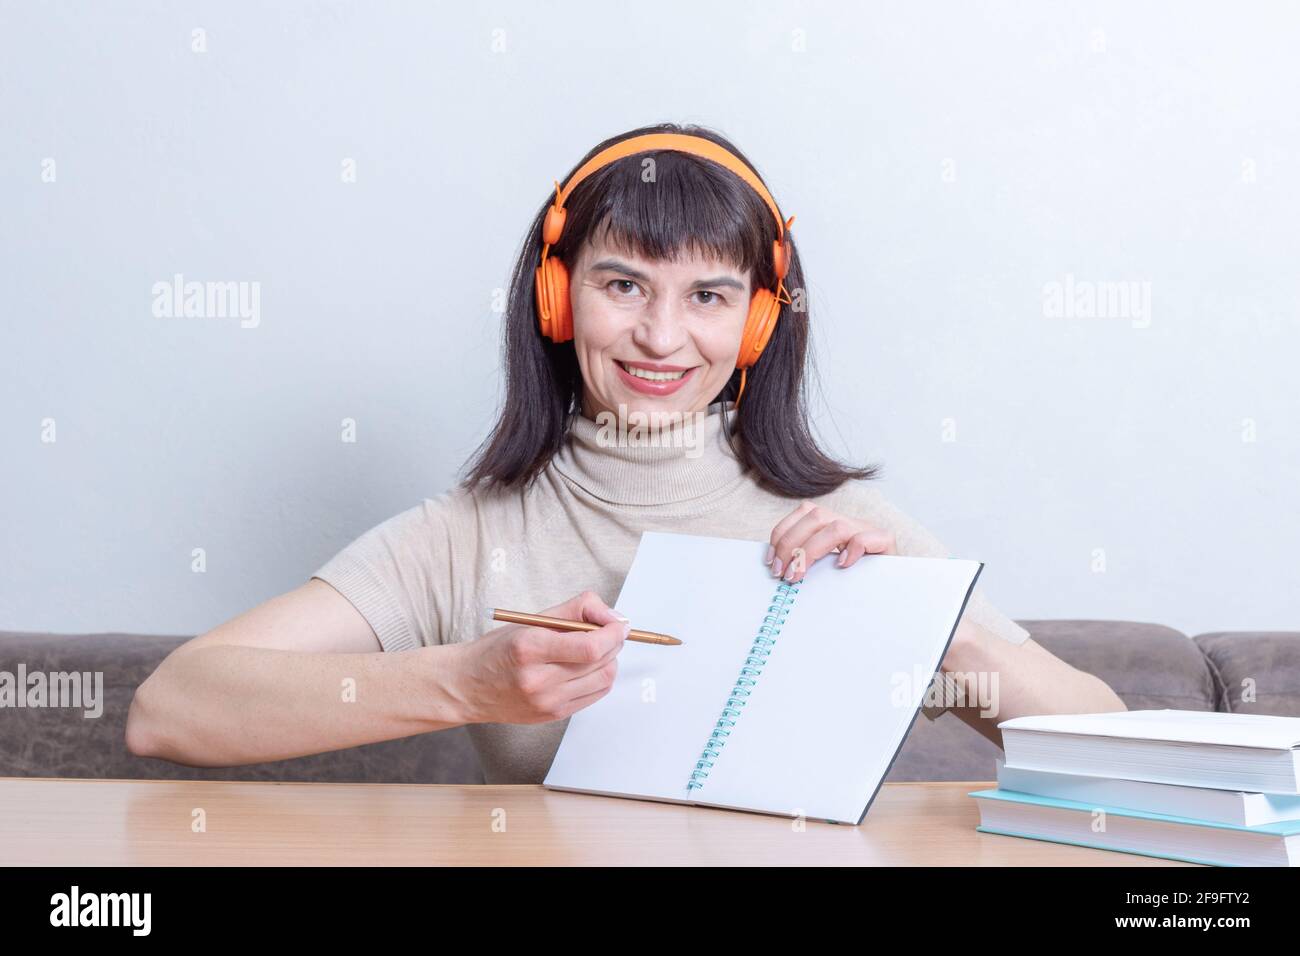 Smiling woman teacher in headphones explains the lesson by showing on a blank exercise book. Back to school concept. Online learning concept Stock Photo